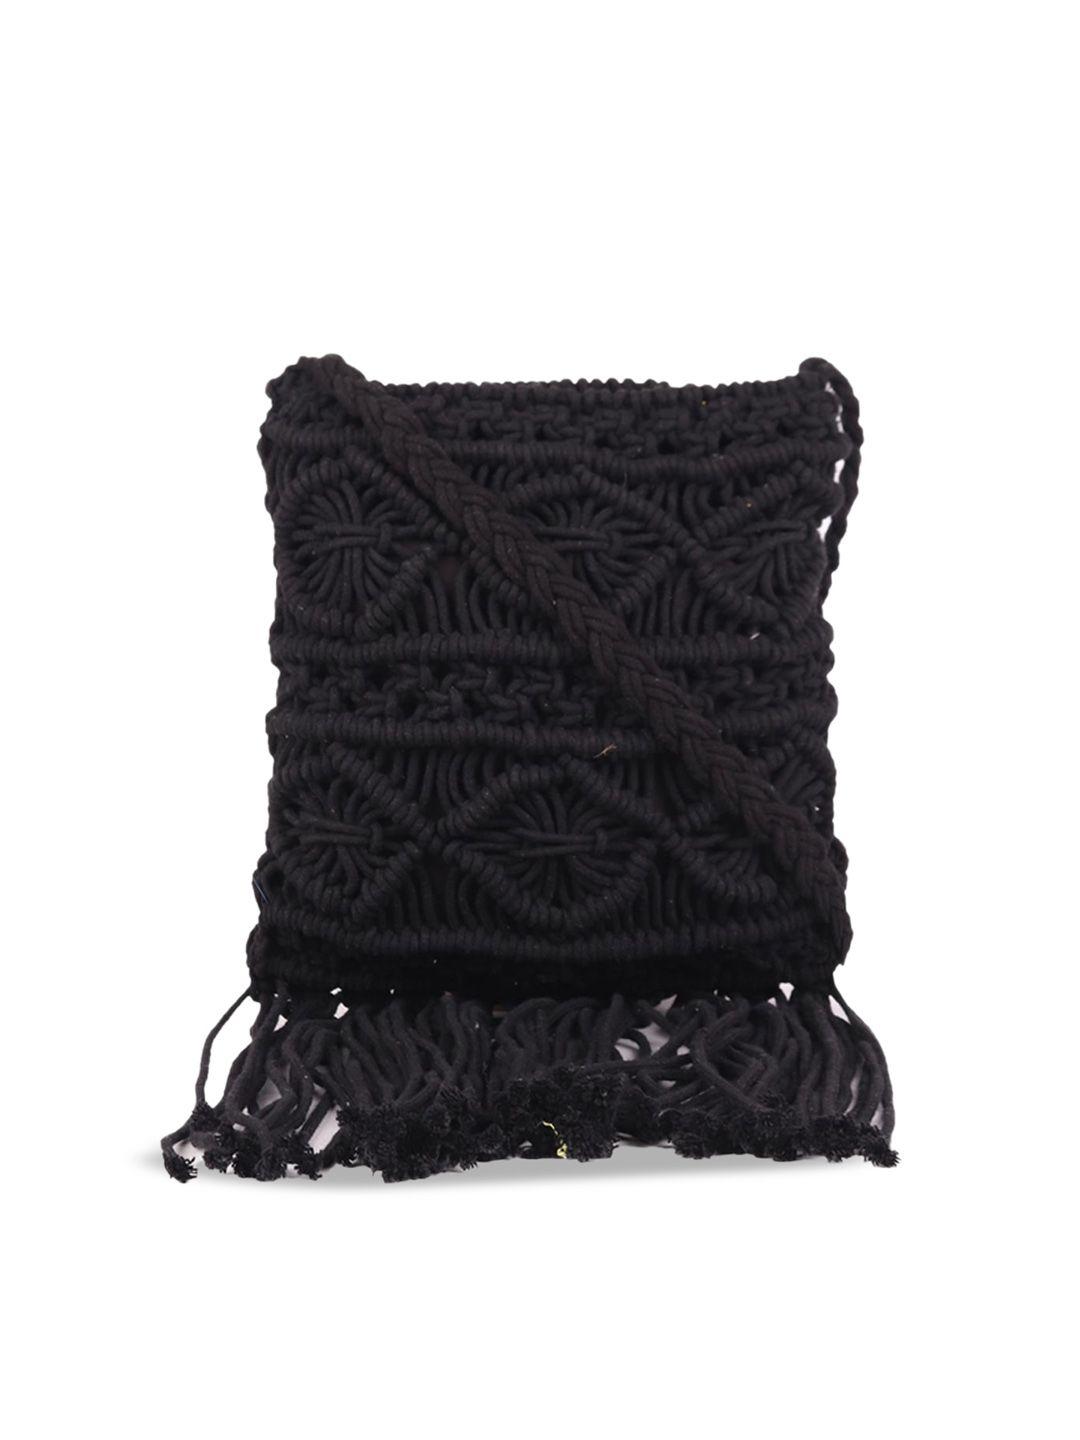 astrid ethnic motifs swagger sling bag with fringed